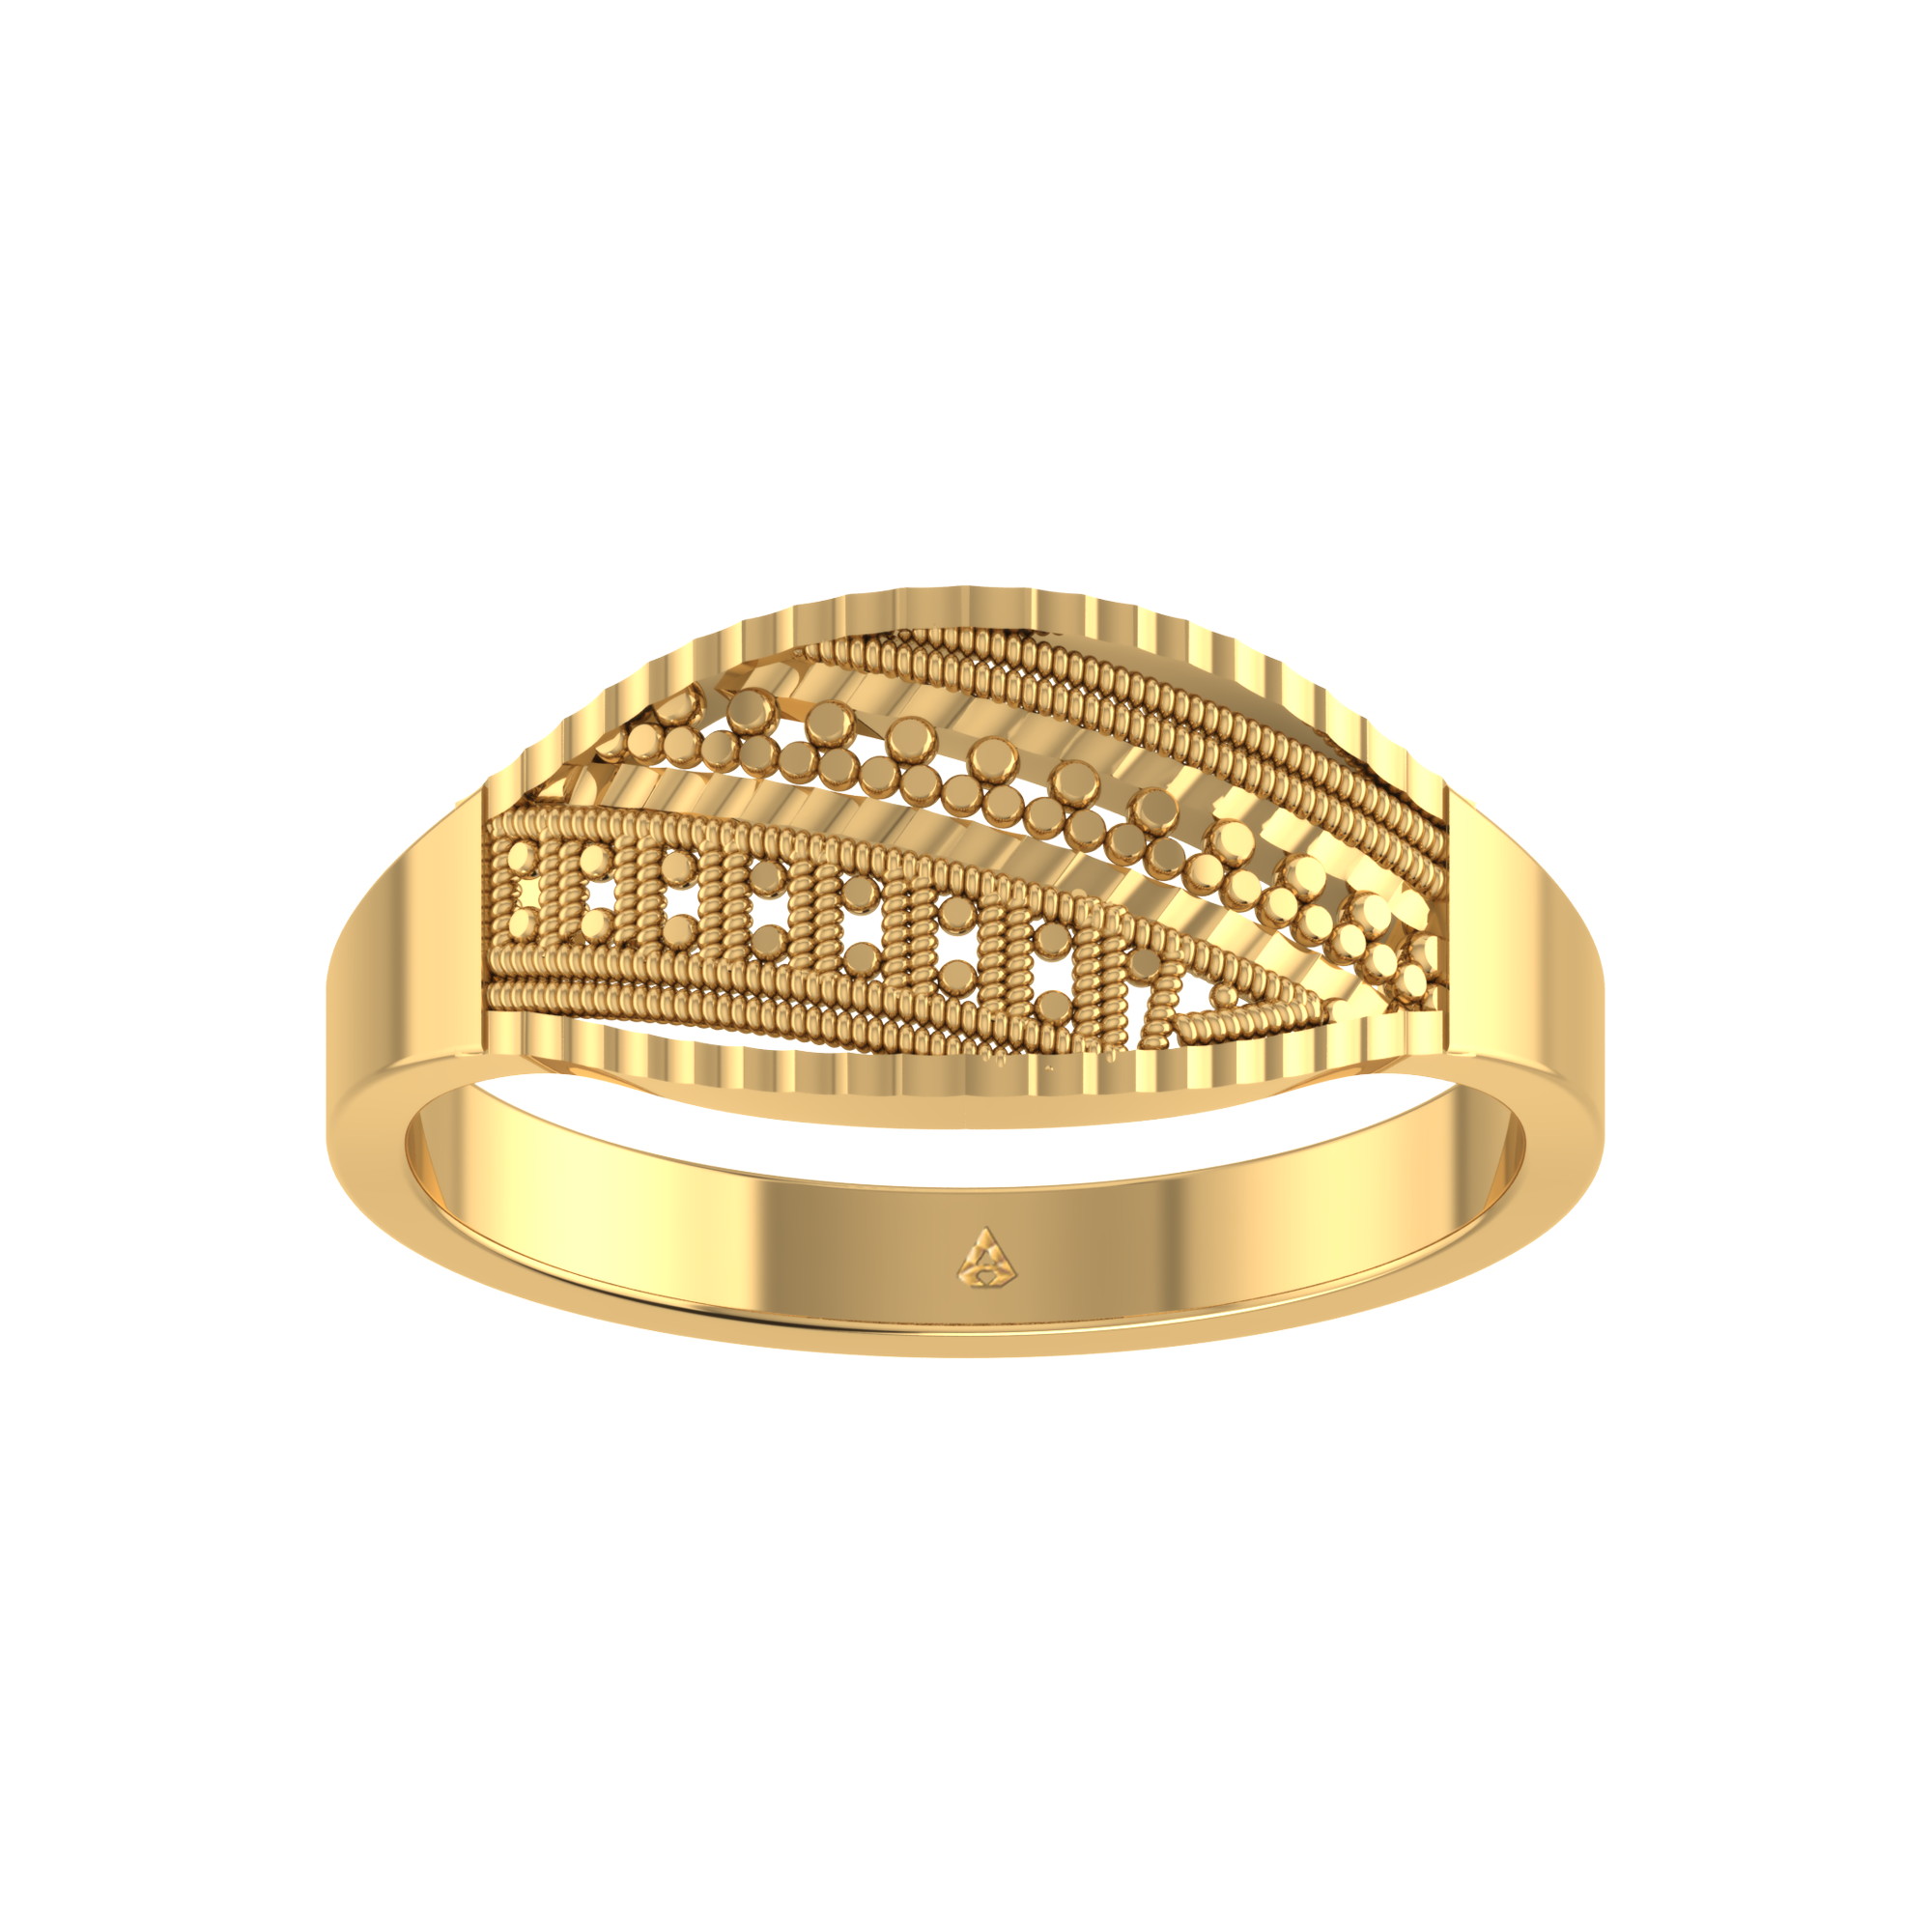 Daily Wear Gold Finger rings Designs Below 10000 || Apsara Fashions | Gold  finger rings, Bridal gold jewellery designs, Finger rings